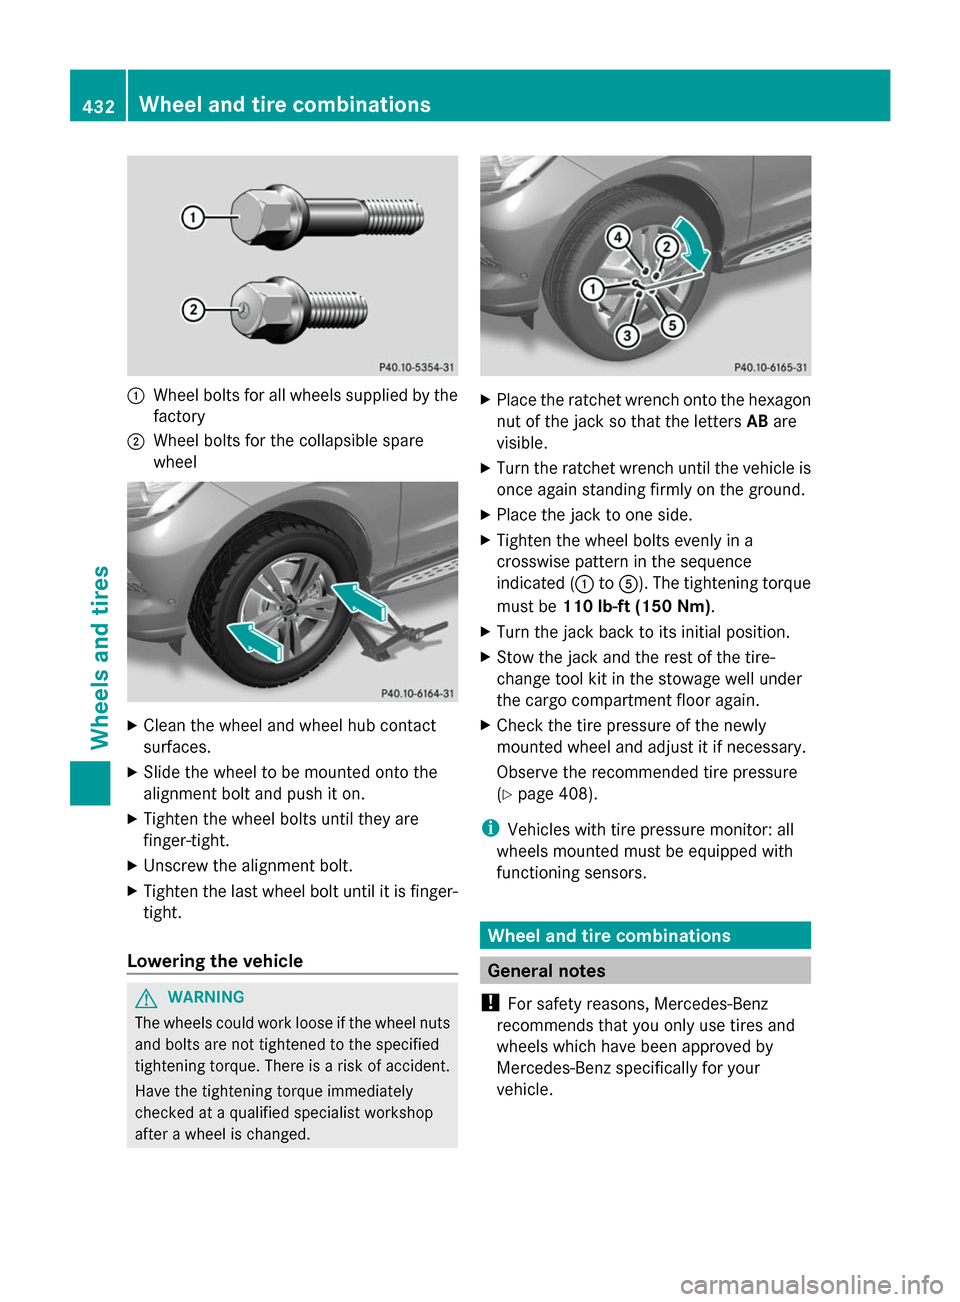 MERCEDES-BENZ GL-Class 2014 X166 Owners Manual :
Wheel bolts for all wheels supplied by the
factory
; Wheel bolts for the collapsible spare
wheel X
Clean the wheel and wheel hub contact
surfaces.
X Slide the wheel to be mounted onto the
alignment 